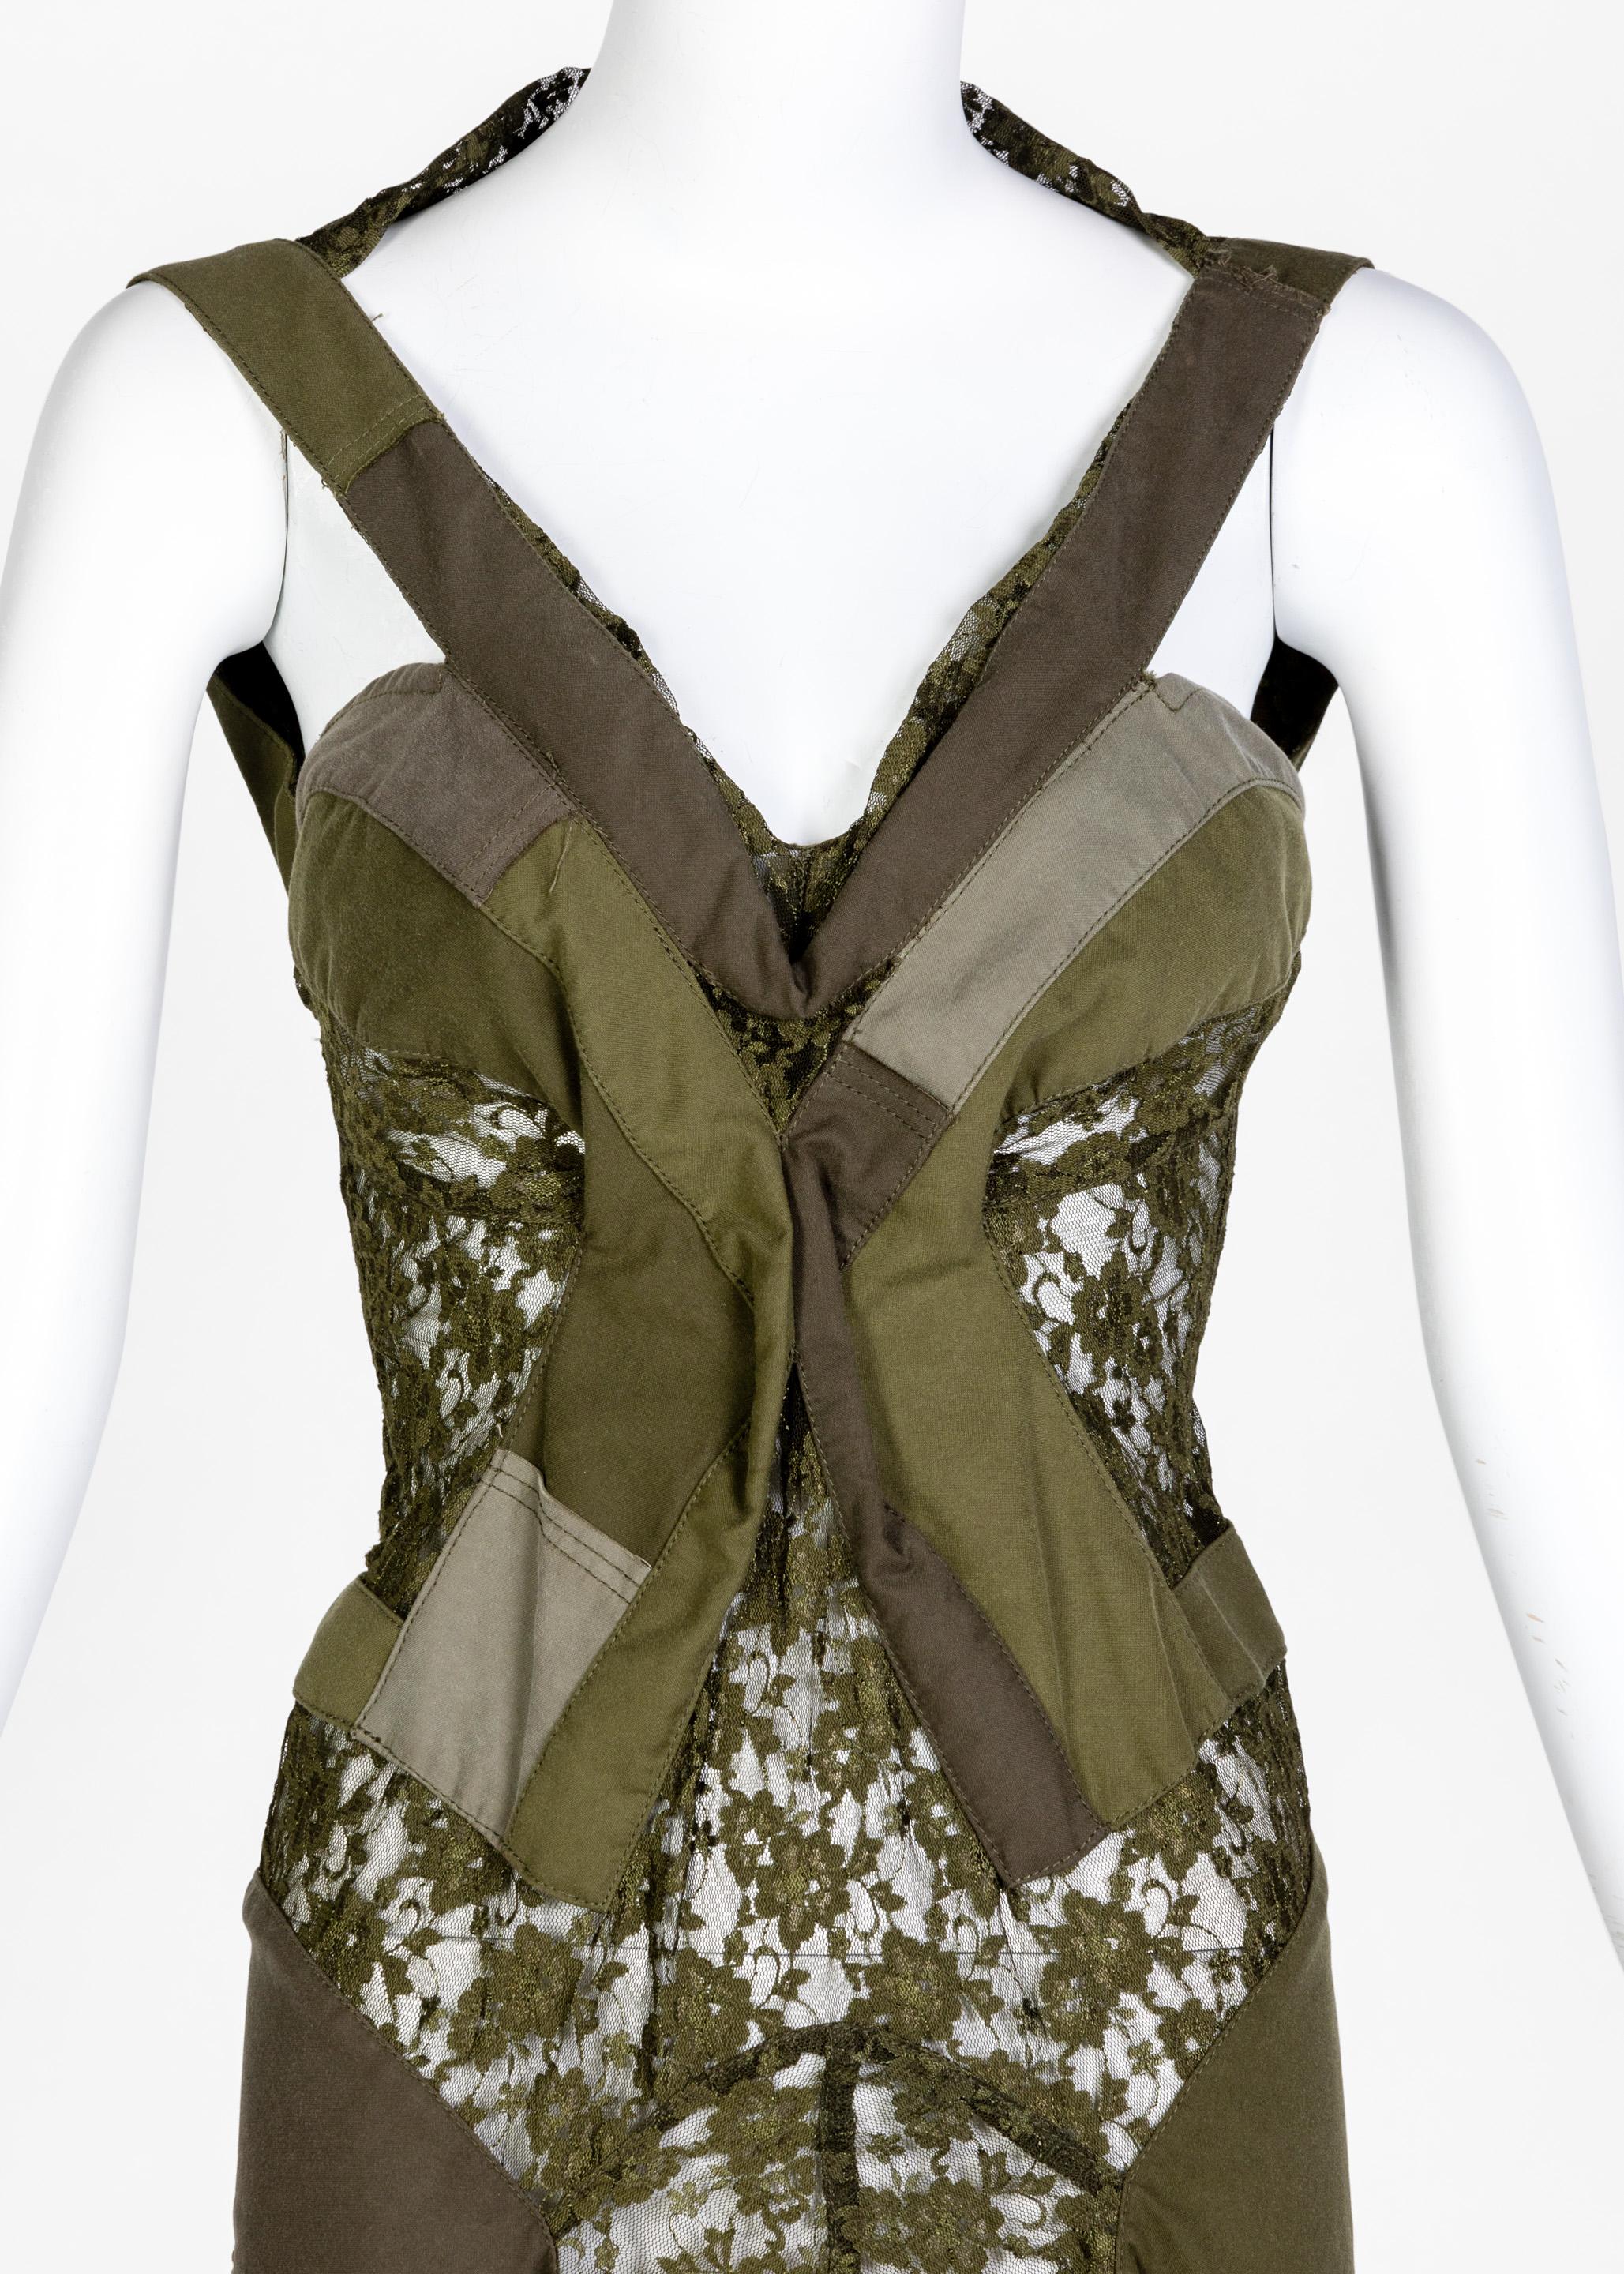 Junya Watanabe Comme des Garcons Green Sleeveless Lace Patch-Work Dress, 2006 In Excellent Condition For Sale In Boca Raton, FL